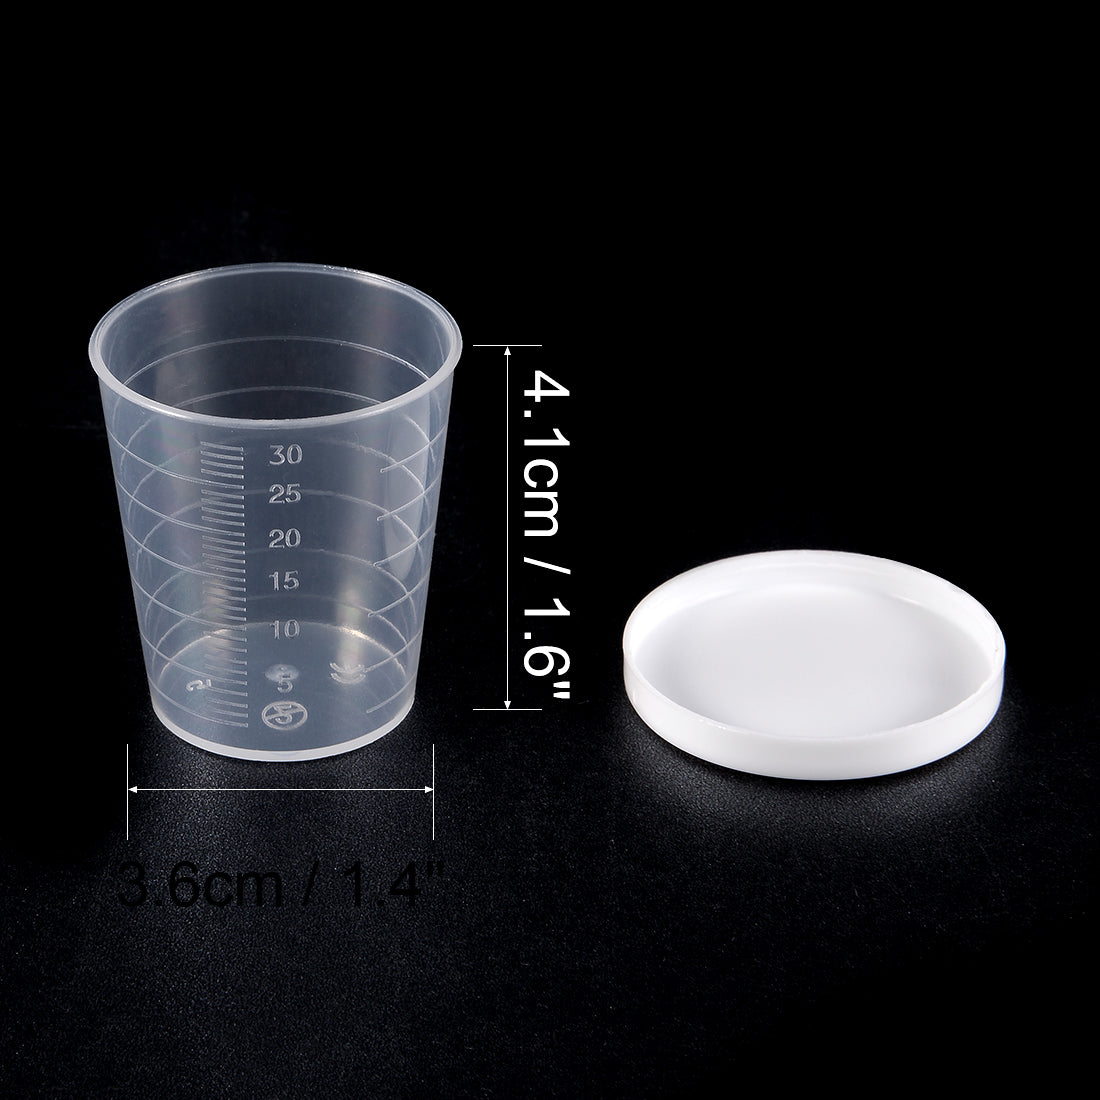 uxcell Uxcell Kitchen Laboratory 30mL Plastic Measuring Cup 10pcs w Cap